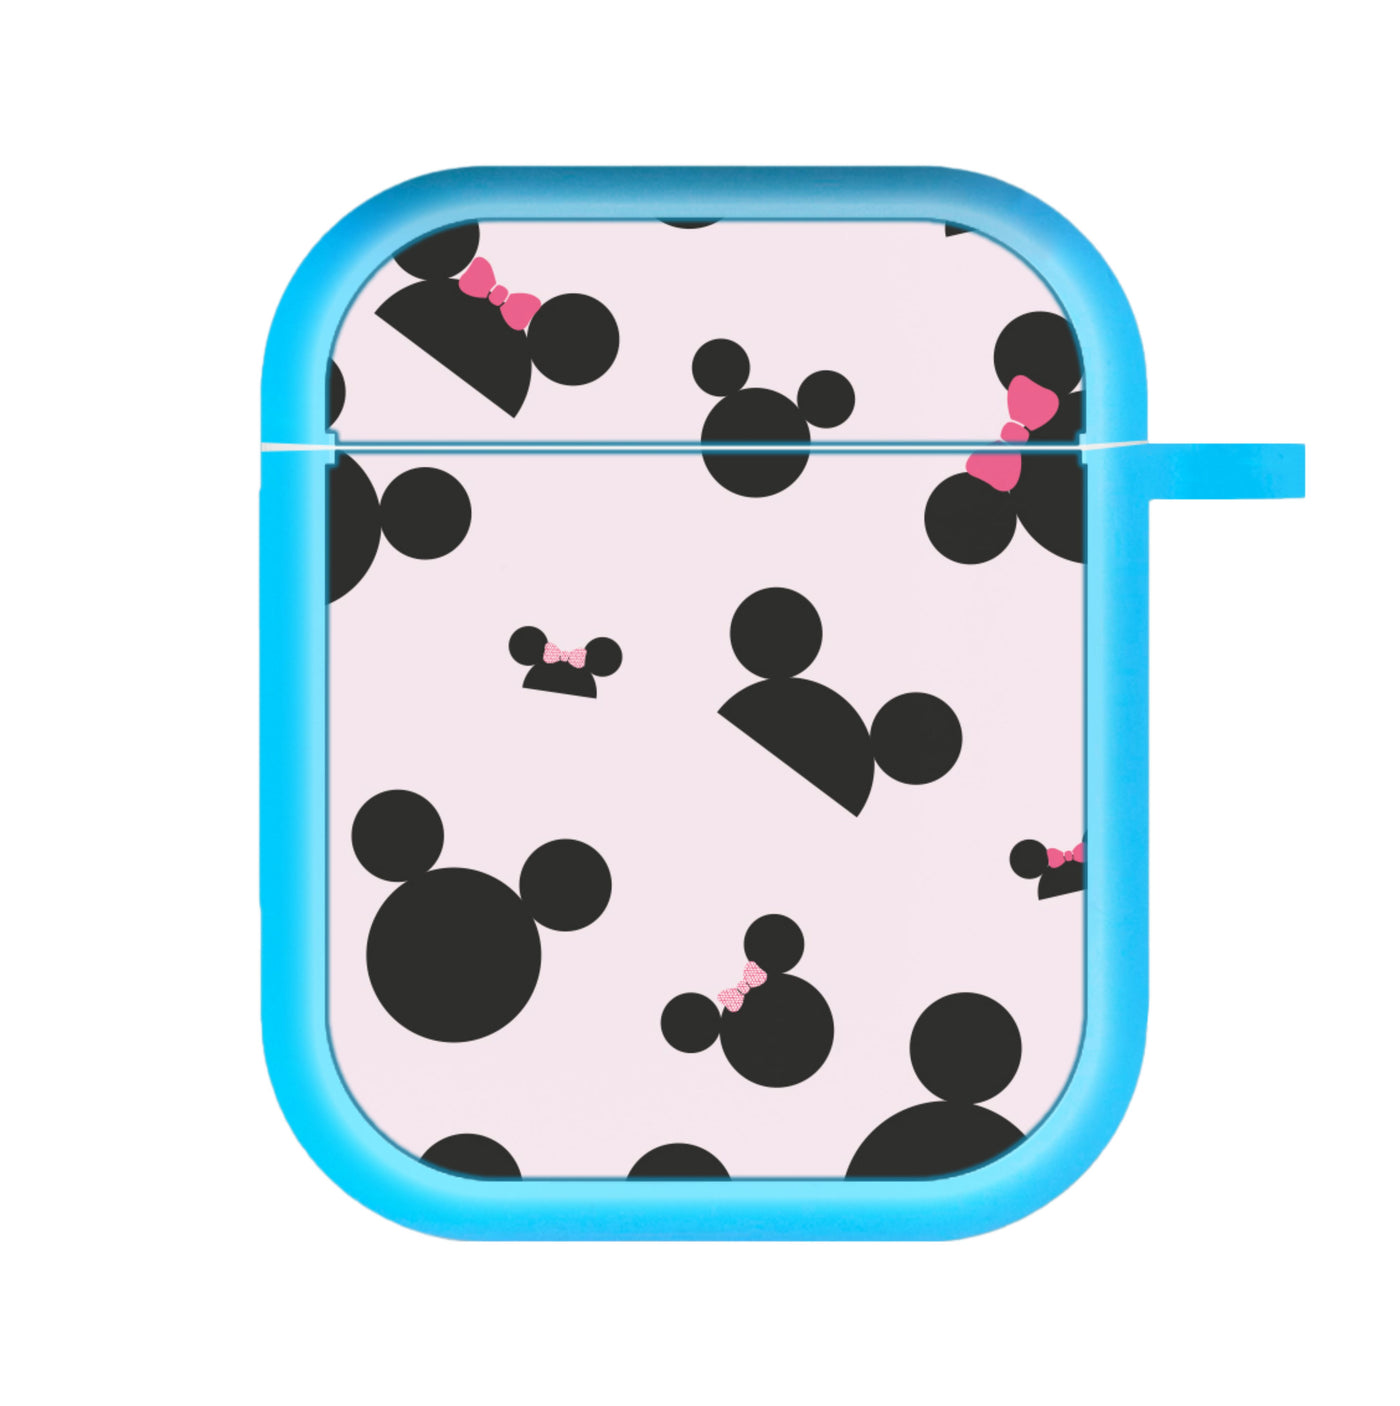 Mickey and Minnie Hats - Disney AirPods Case